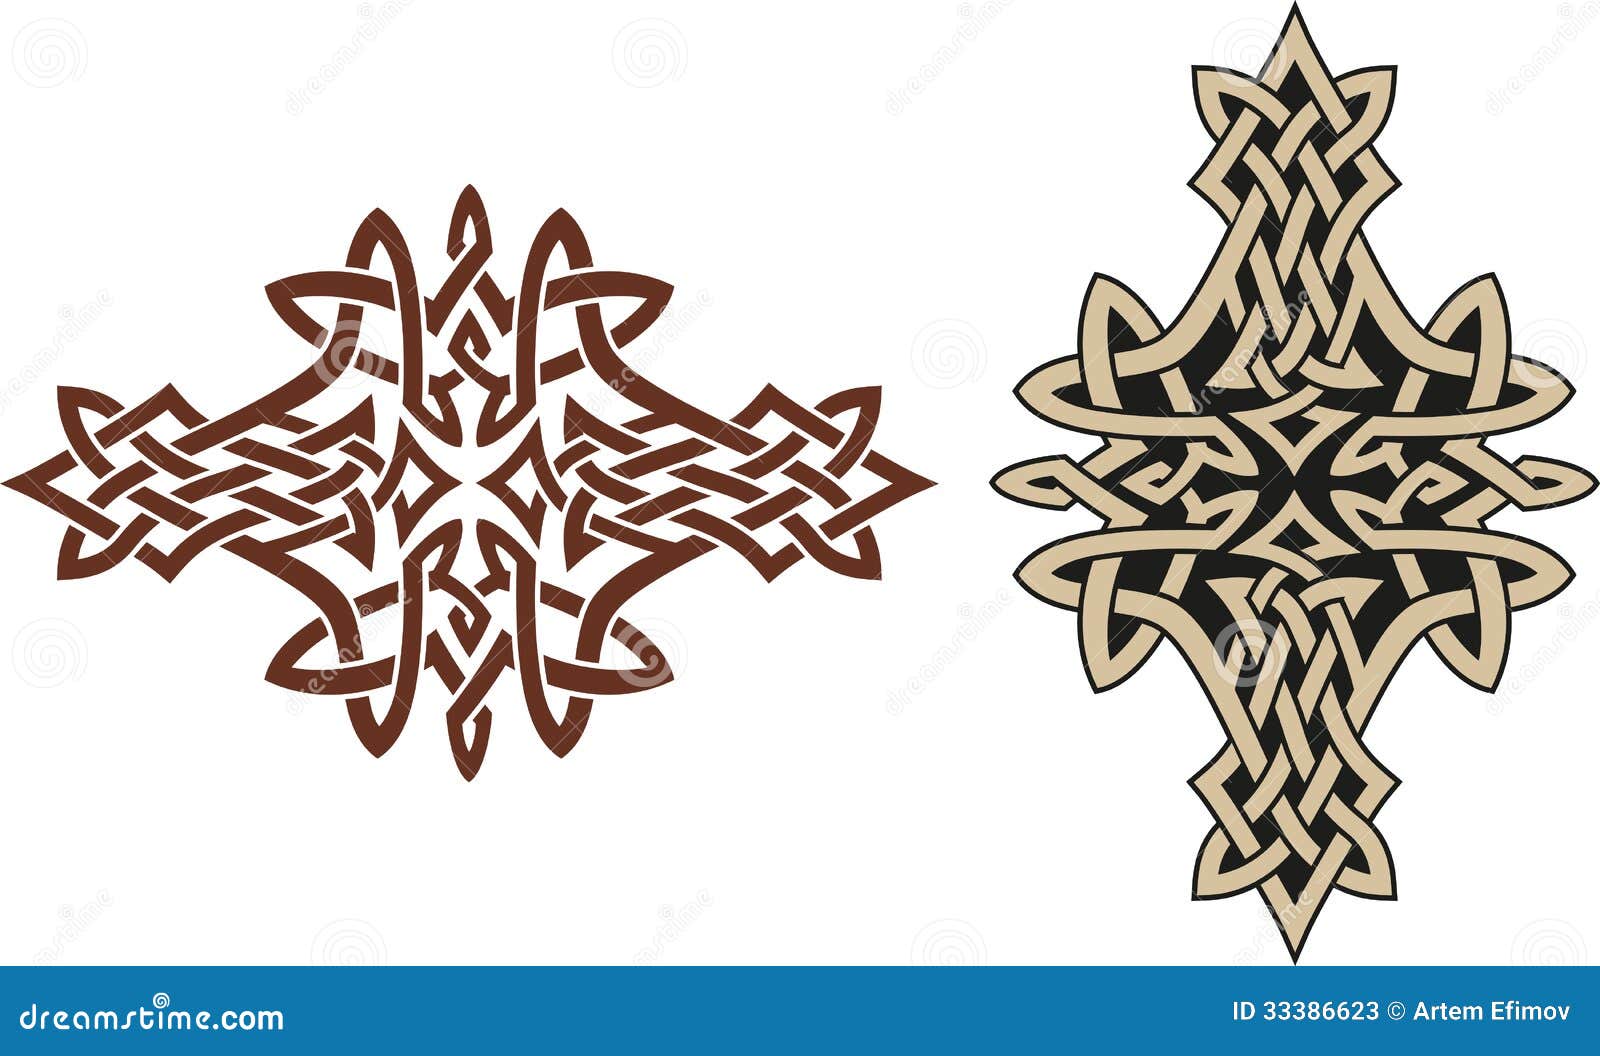 Snowflake Tattoo machine Celtic knot Blue snowflake pattern material  white geometric Pattern snowflakes png  PNGWing